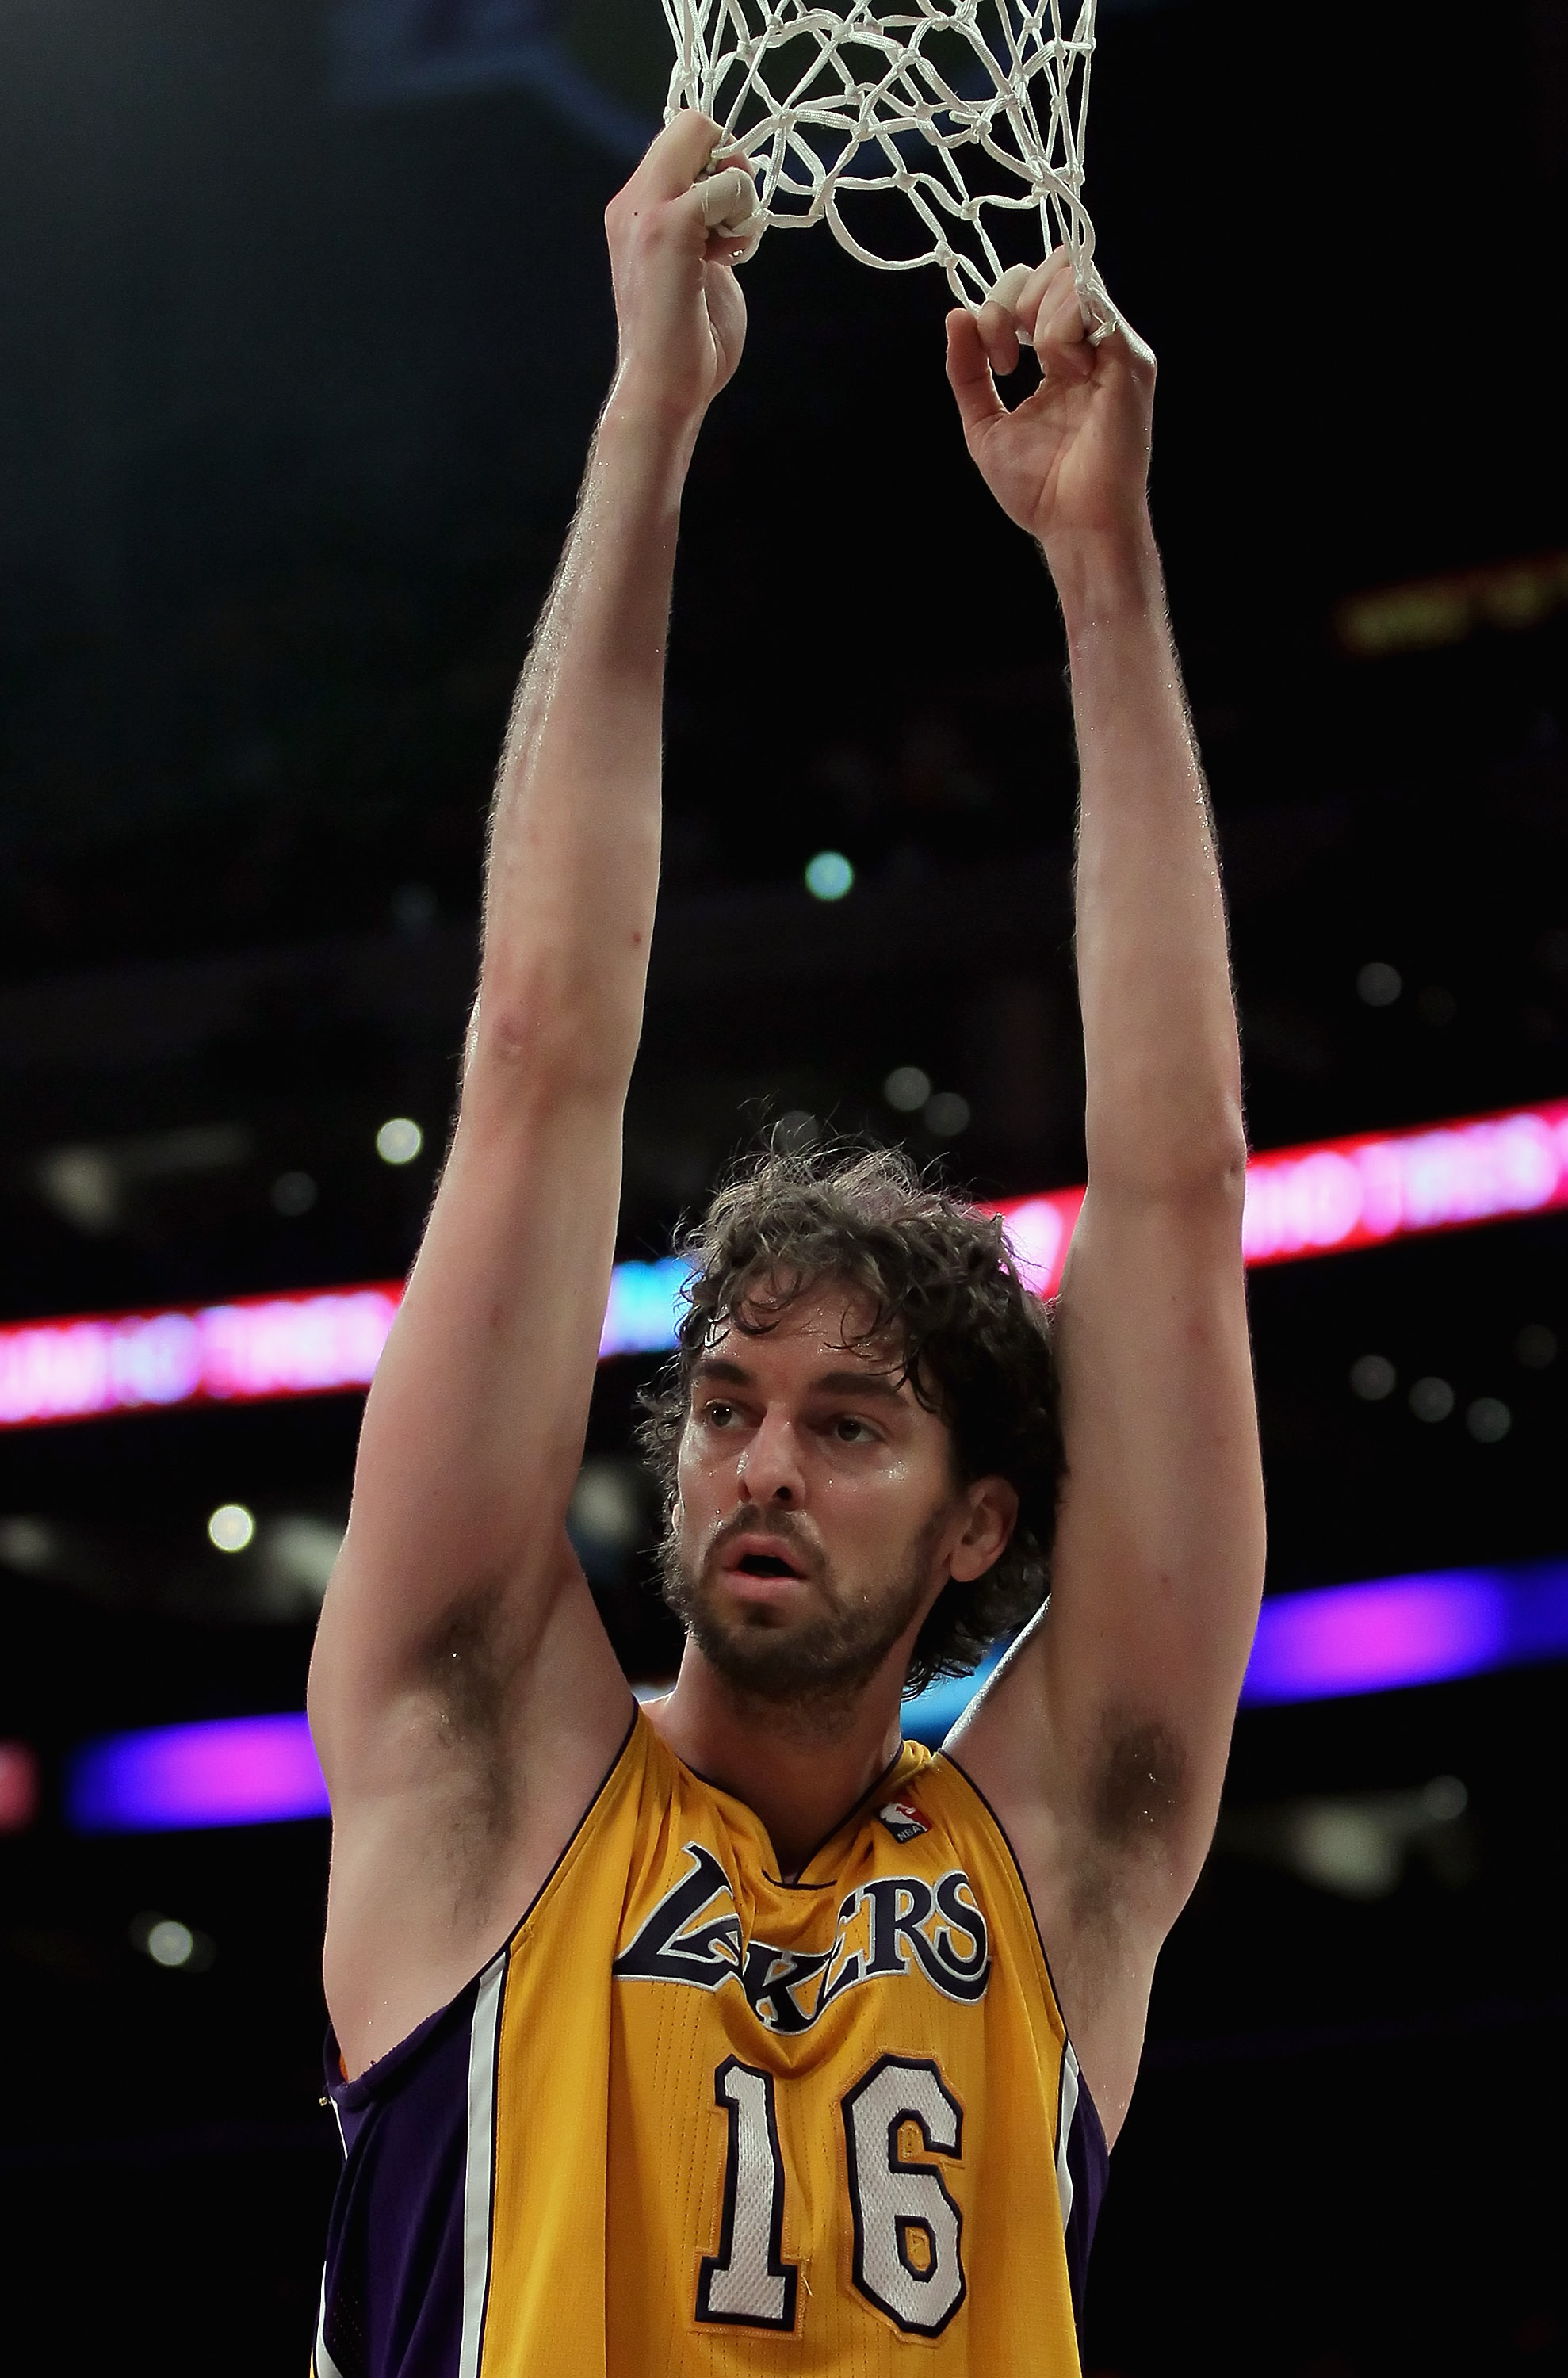 LOS ANGELES, CA - FEBRUARY 22:  Pau Gasol #16 of the Los Angeles Lakers hangs from the net against the Atlanta Hawks in the first half at Staples Center on February 22, 2011 in Los Angeles, California. The Lakers defeated the Hawks 104-80. NOTE TO USER: U